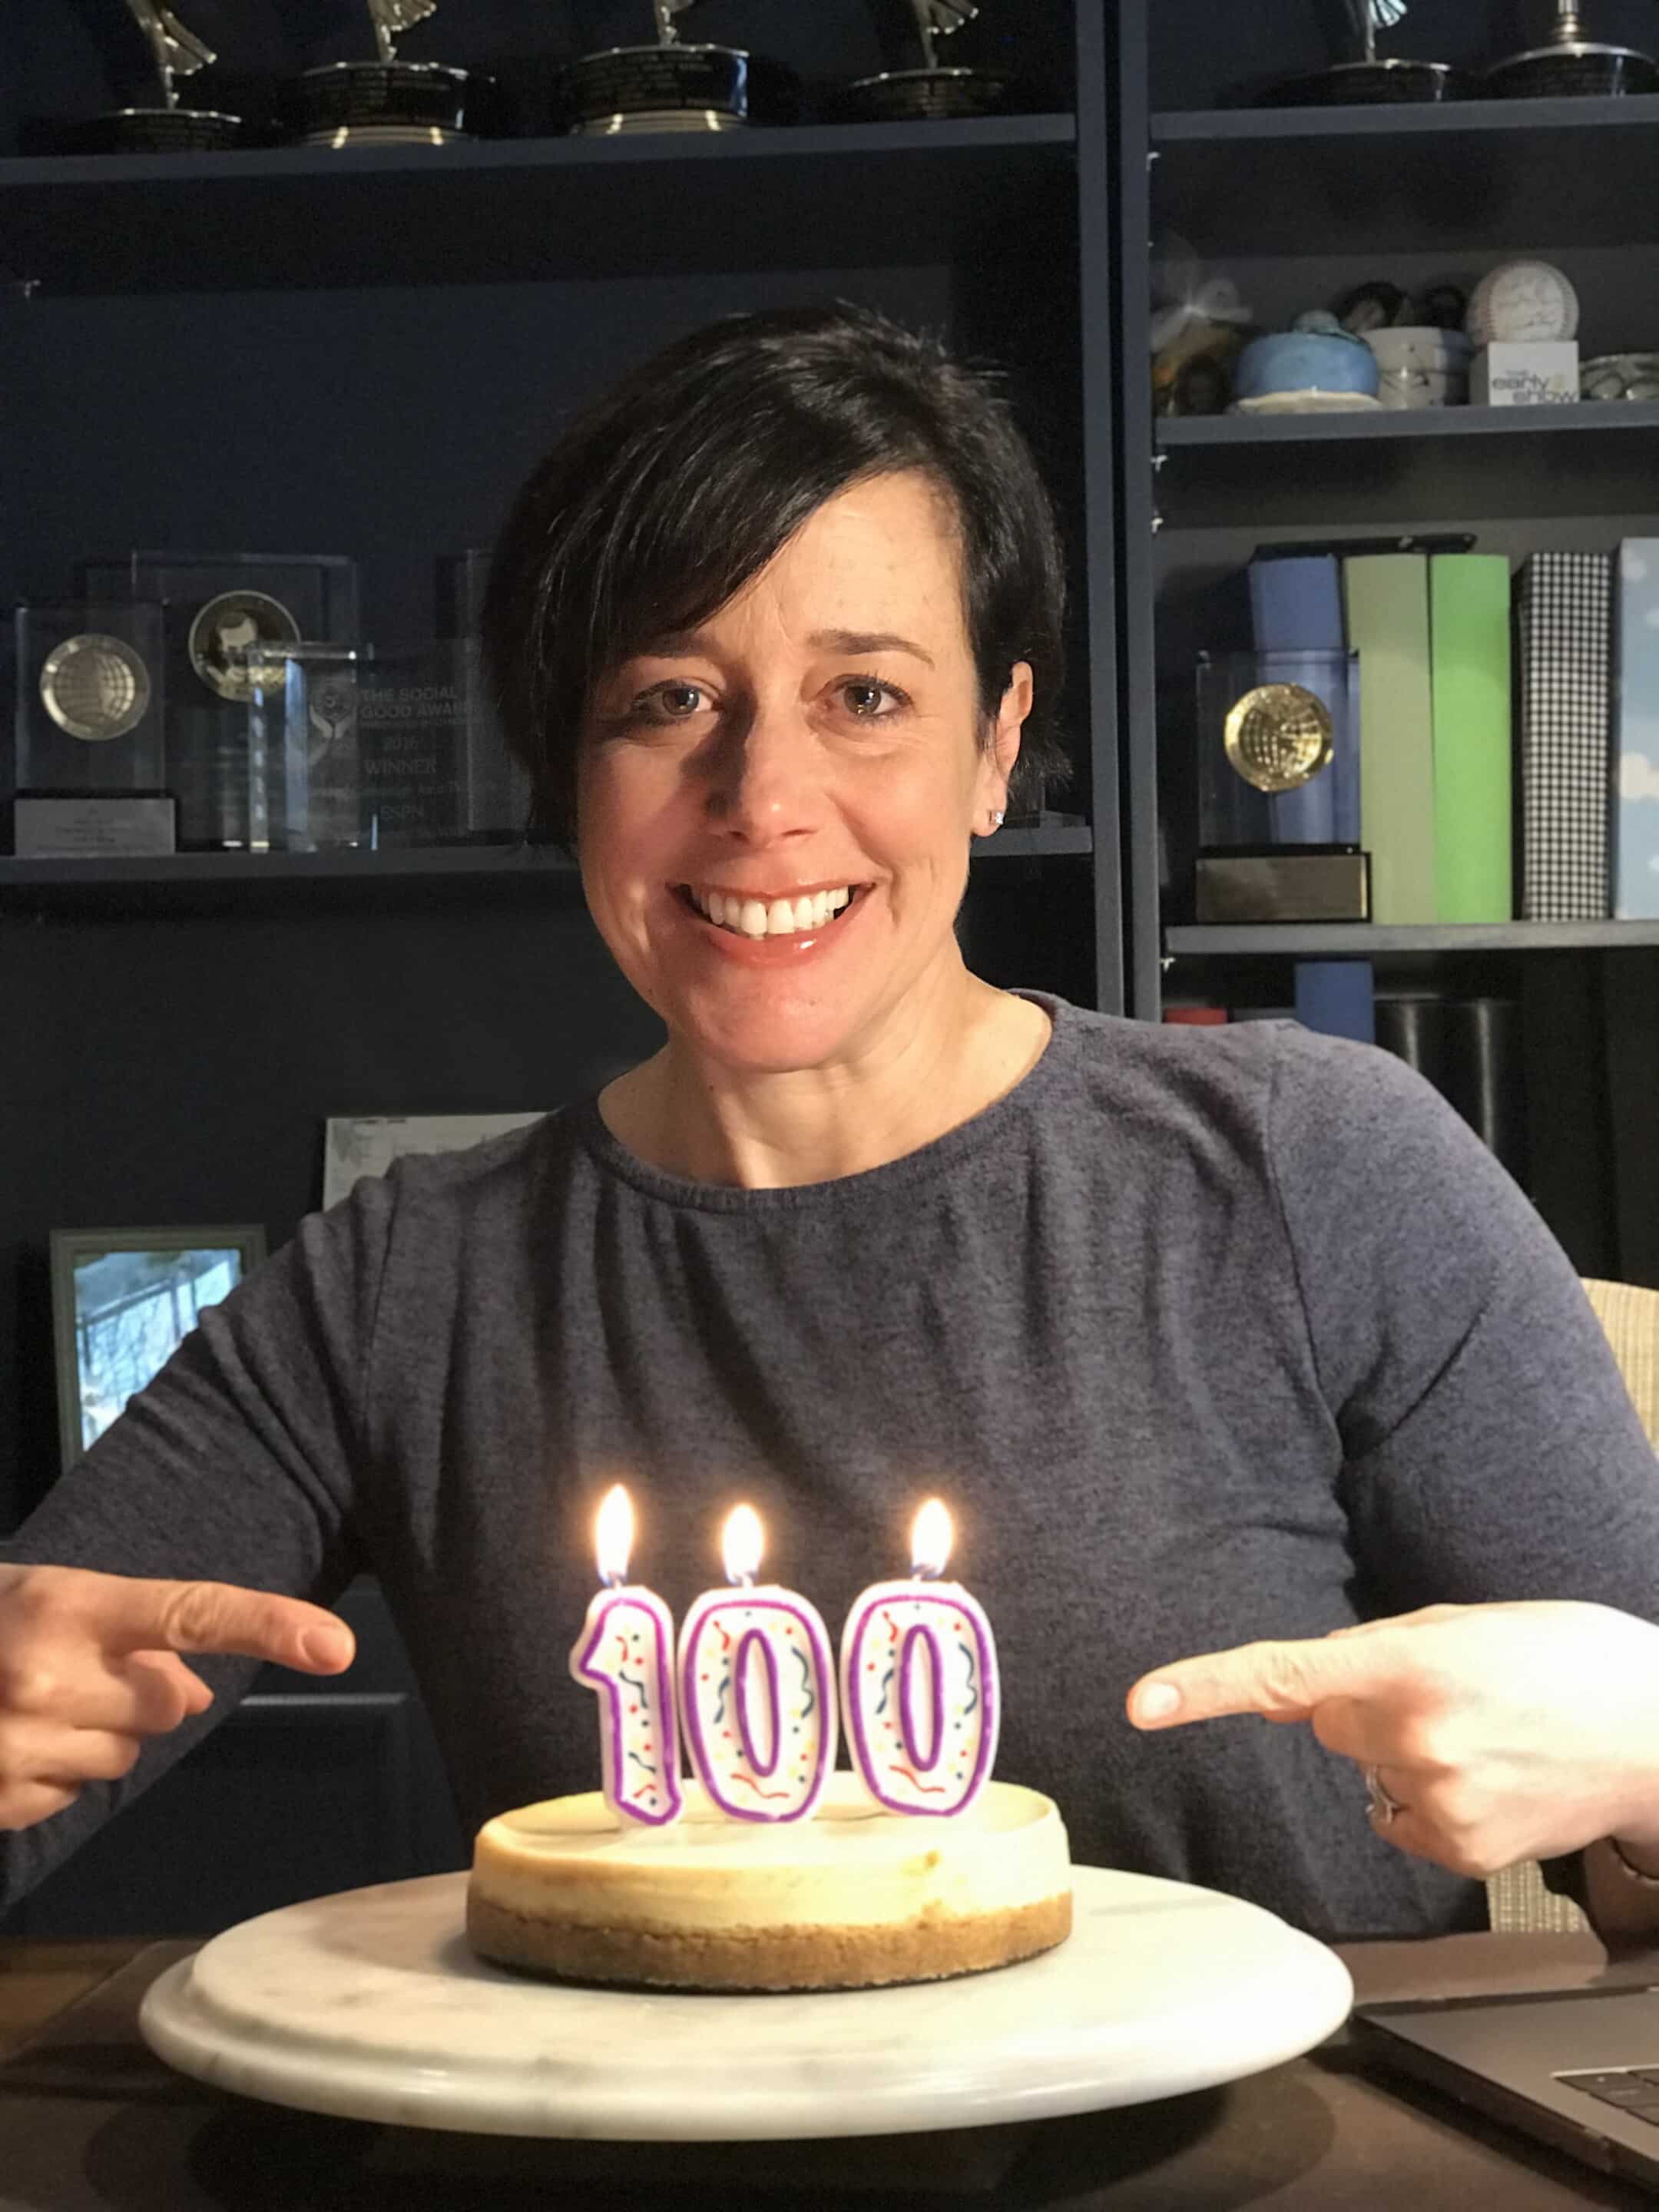 Valerie gordon 100 blog posts scaled happy 200th post in the blog!